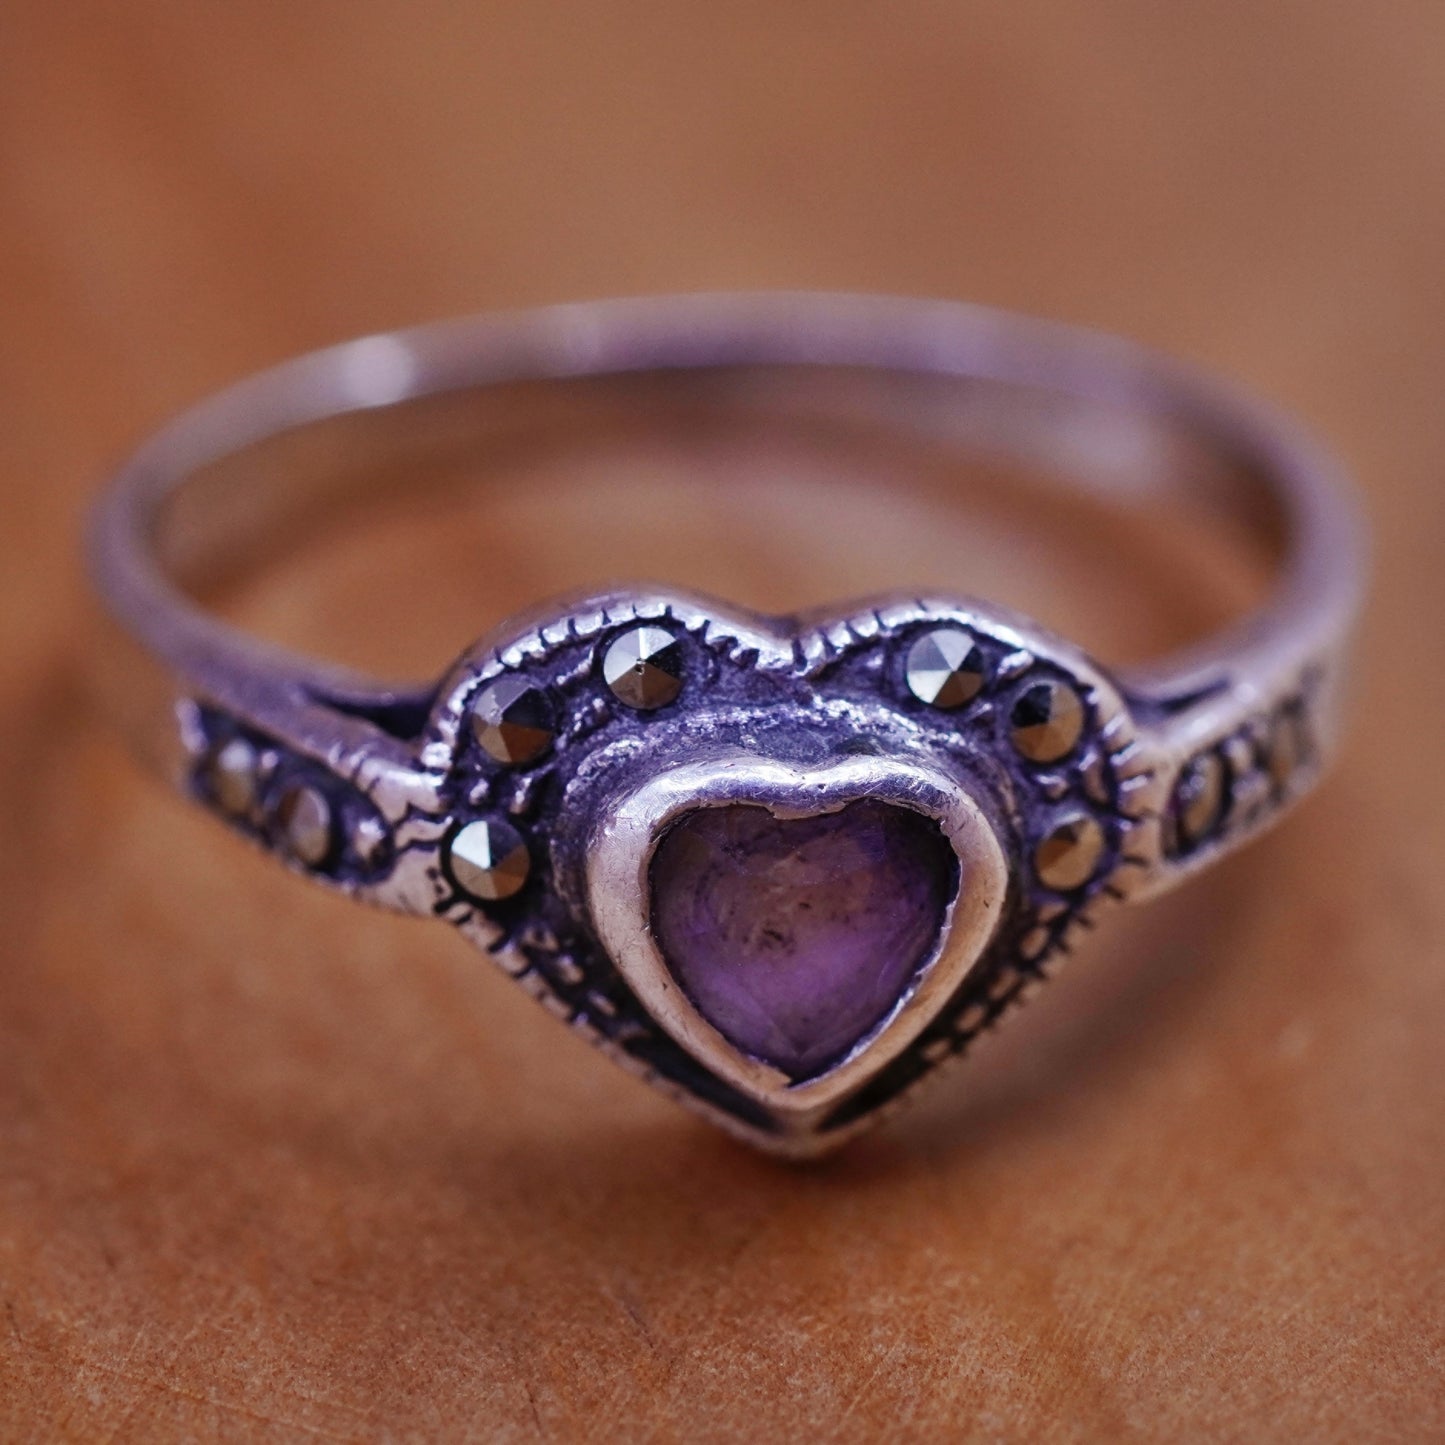 Size 6.25, Sterling 925 silver handmade ring with heart amethyst and marcasite